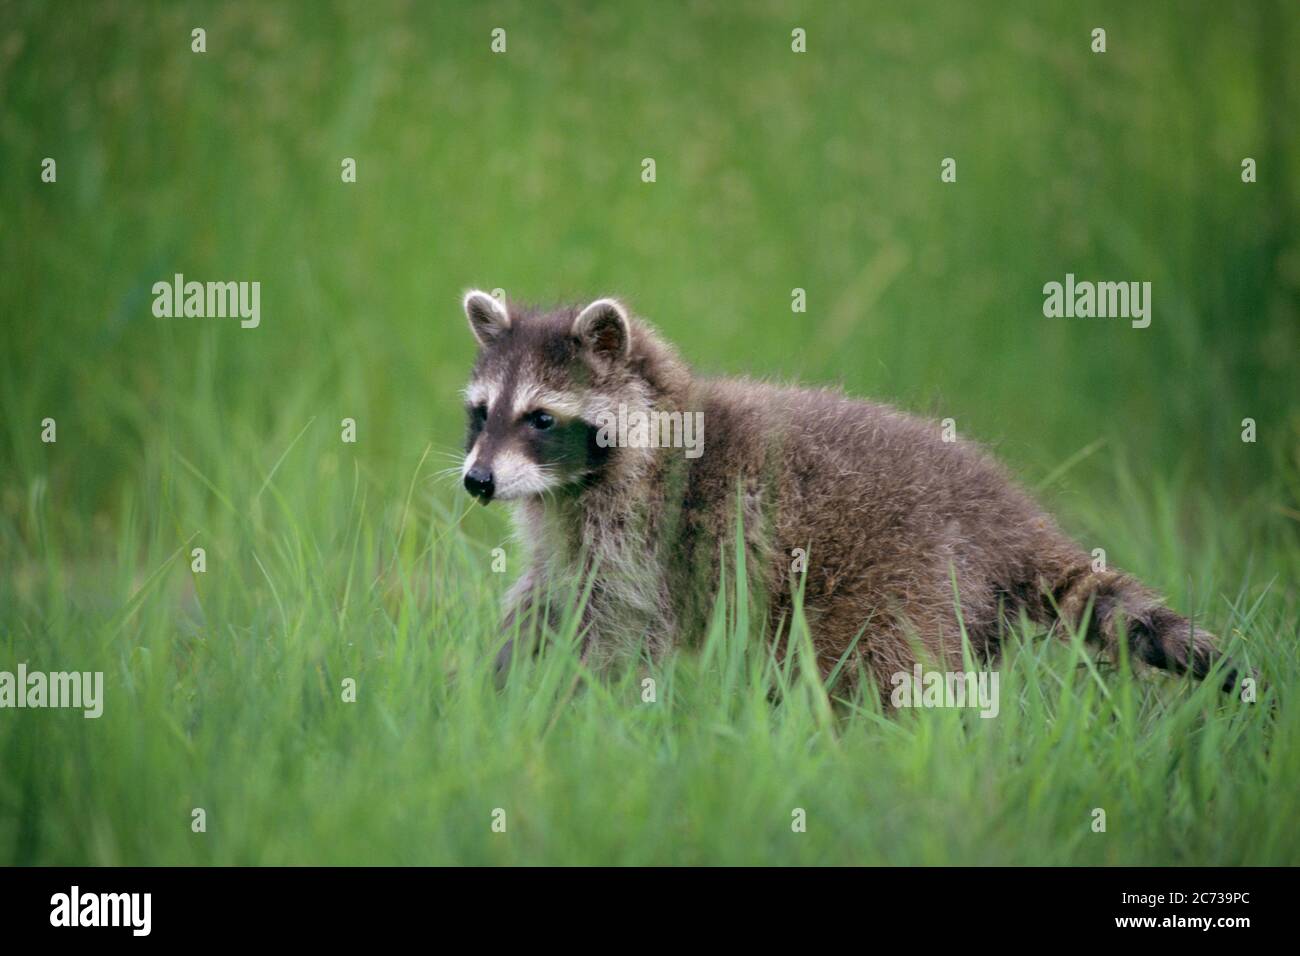 1990s SINGLE YOUNG JUVENILE RACCOON Procyon lotor STANDING WALKING IN TALL GREEN SPRINGTIME GRASS NORTH AMERICA - kz5059 HFF002 HARS BANDIT IMMATURE Stock Photo